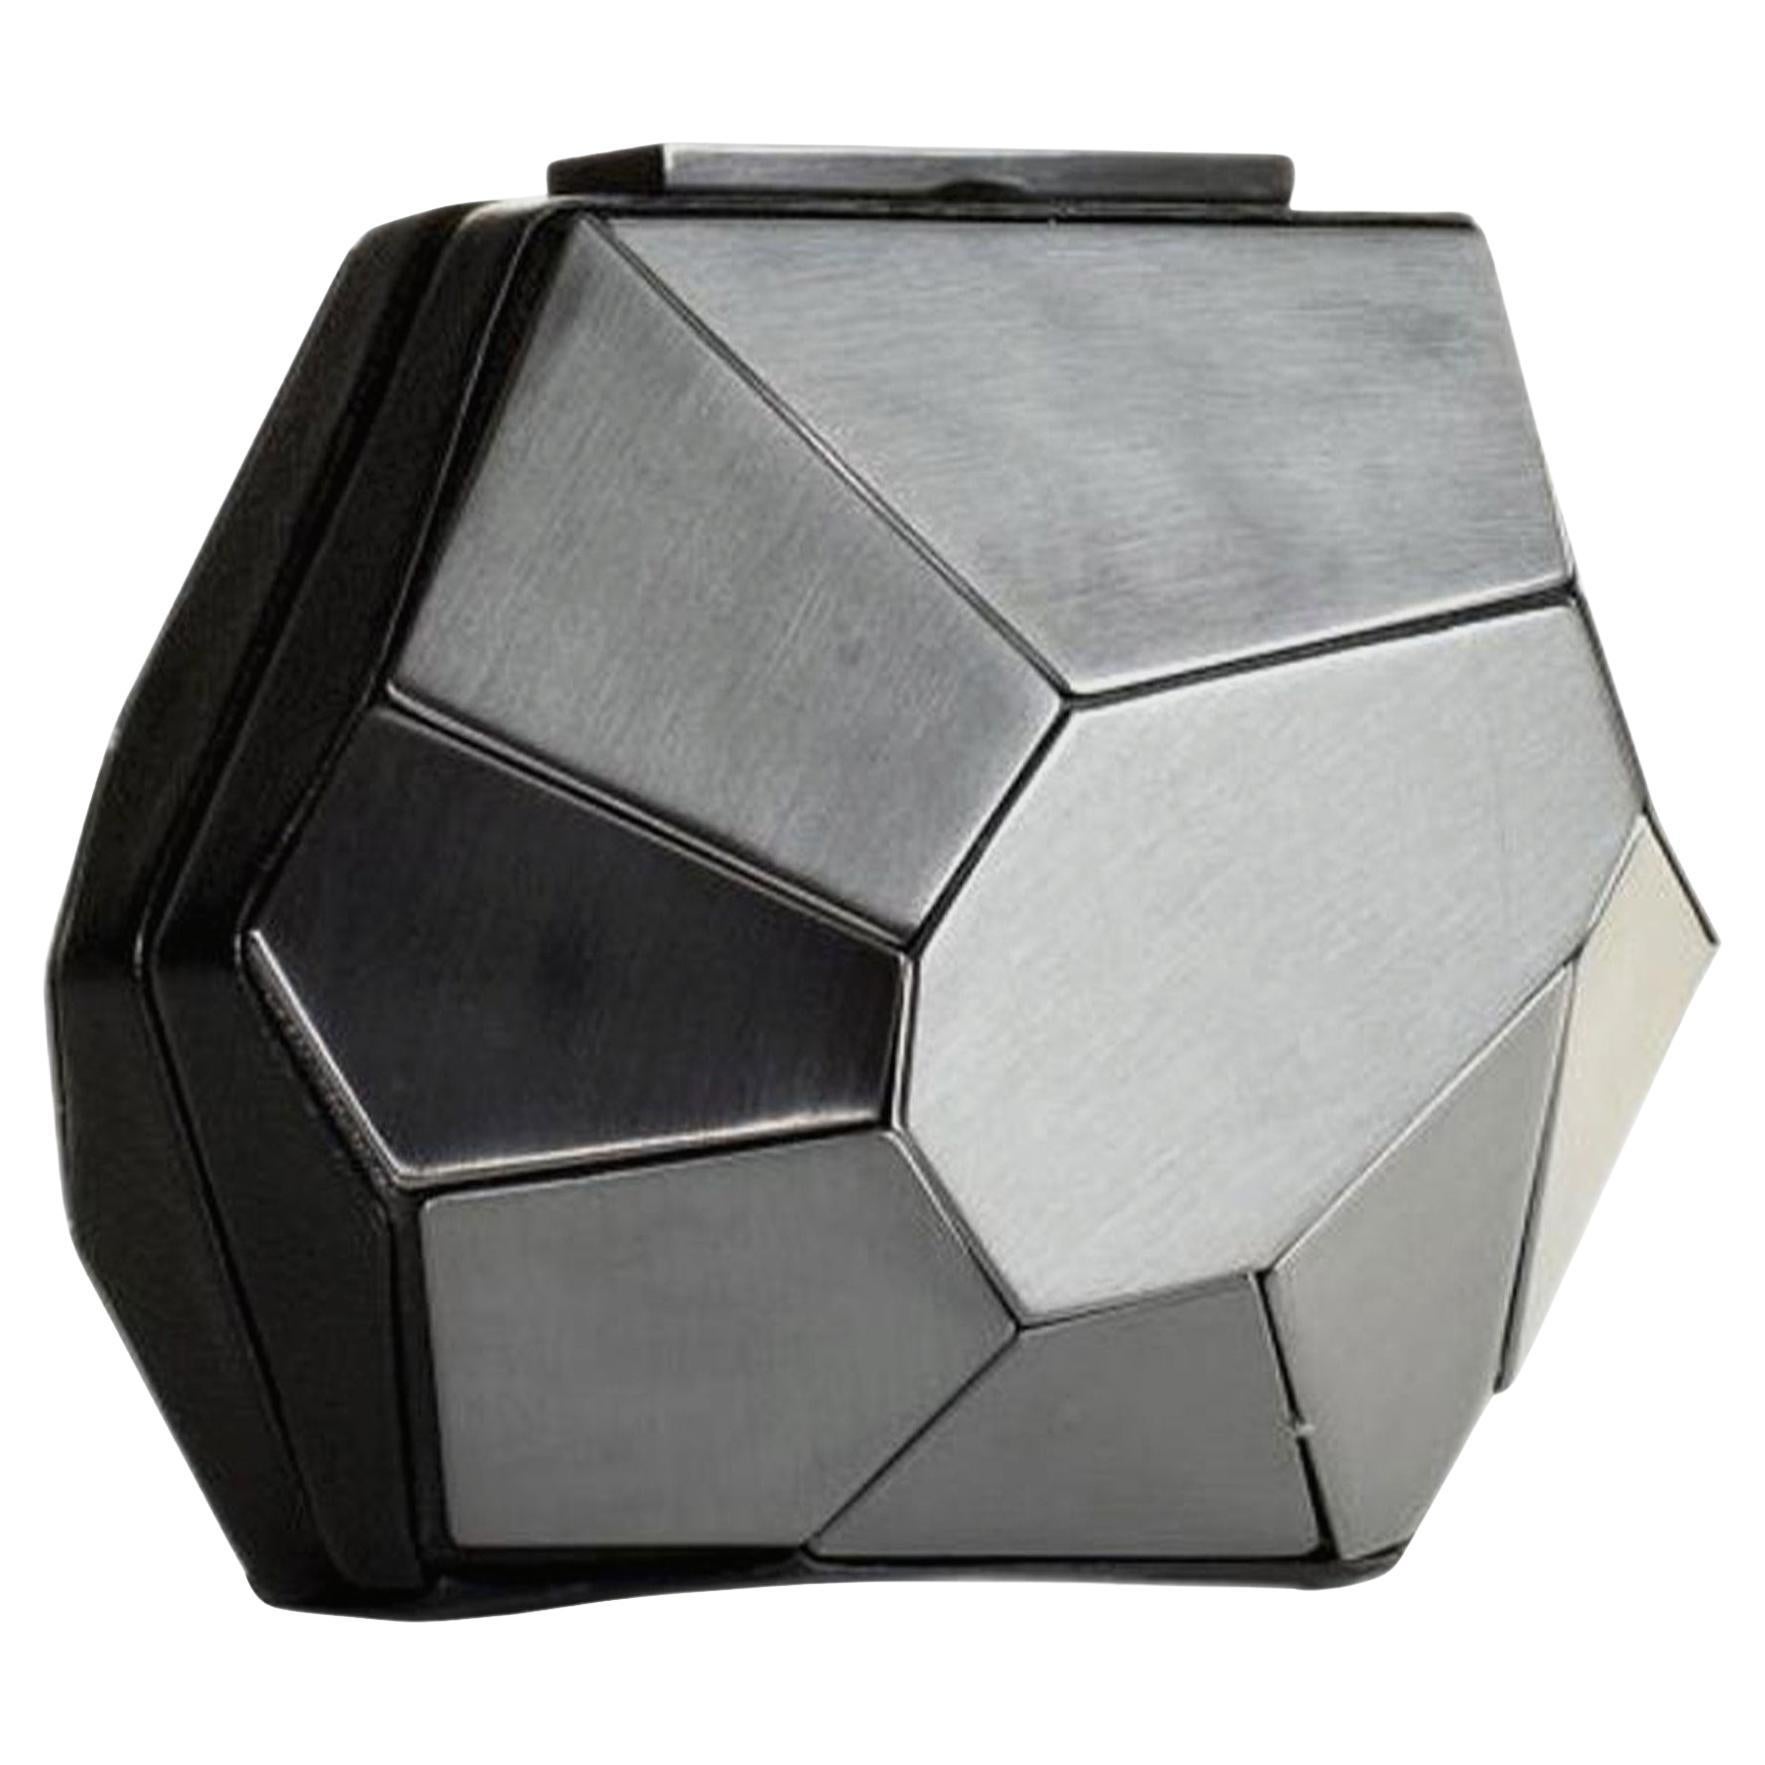 Hervé Leger Rare Multifaceted Minaudière Metallic Grey Metal and Leather Clutch For Sale